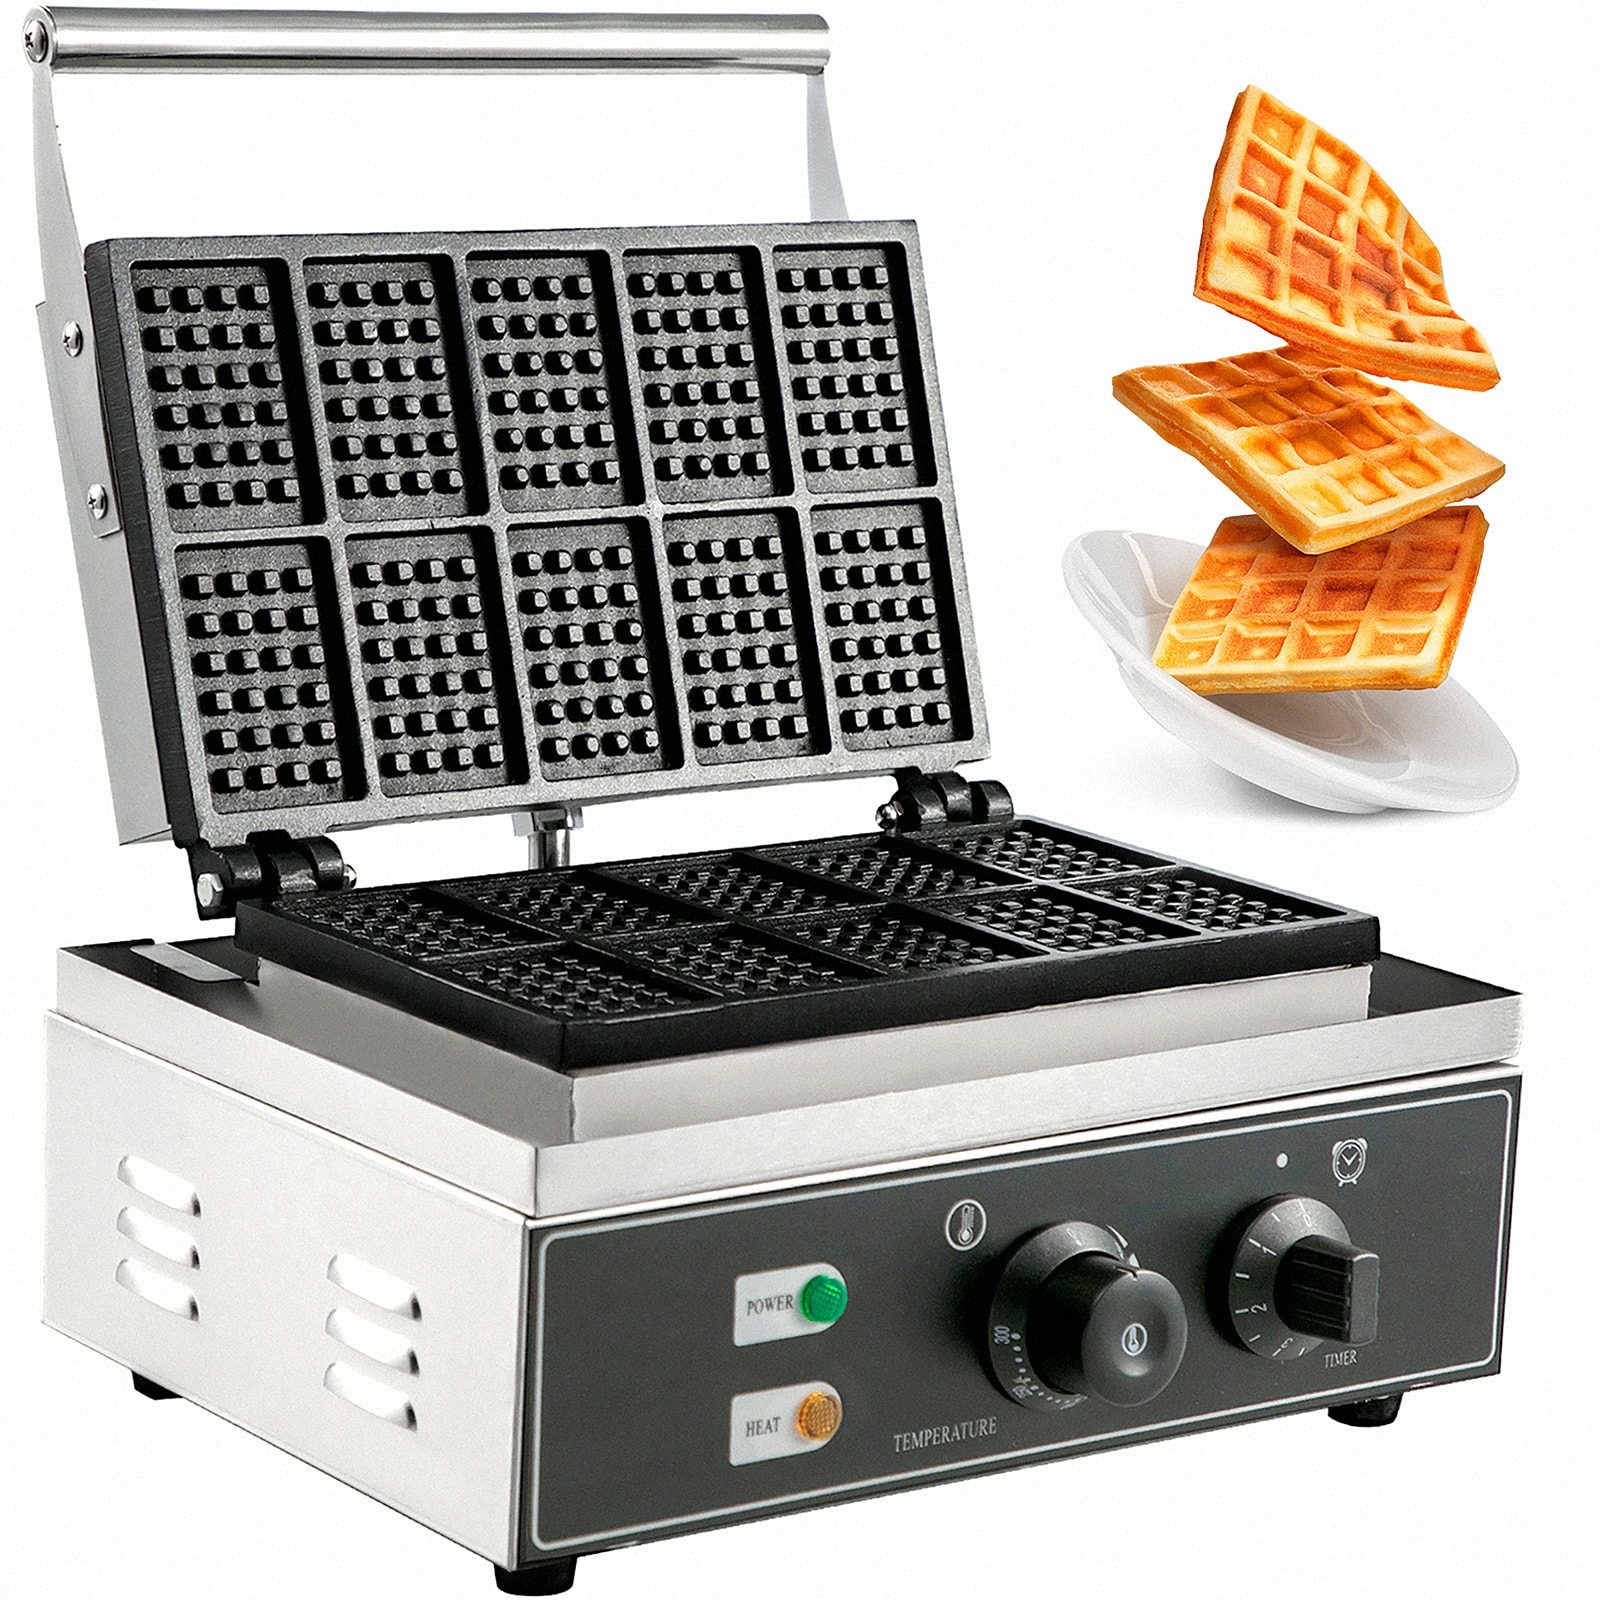 VEVOR 1550W Stainless Steel Waffle Maker, 10PCs, Square Waffle Shape, Removable Plates, Flippable, Timer Knob